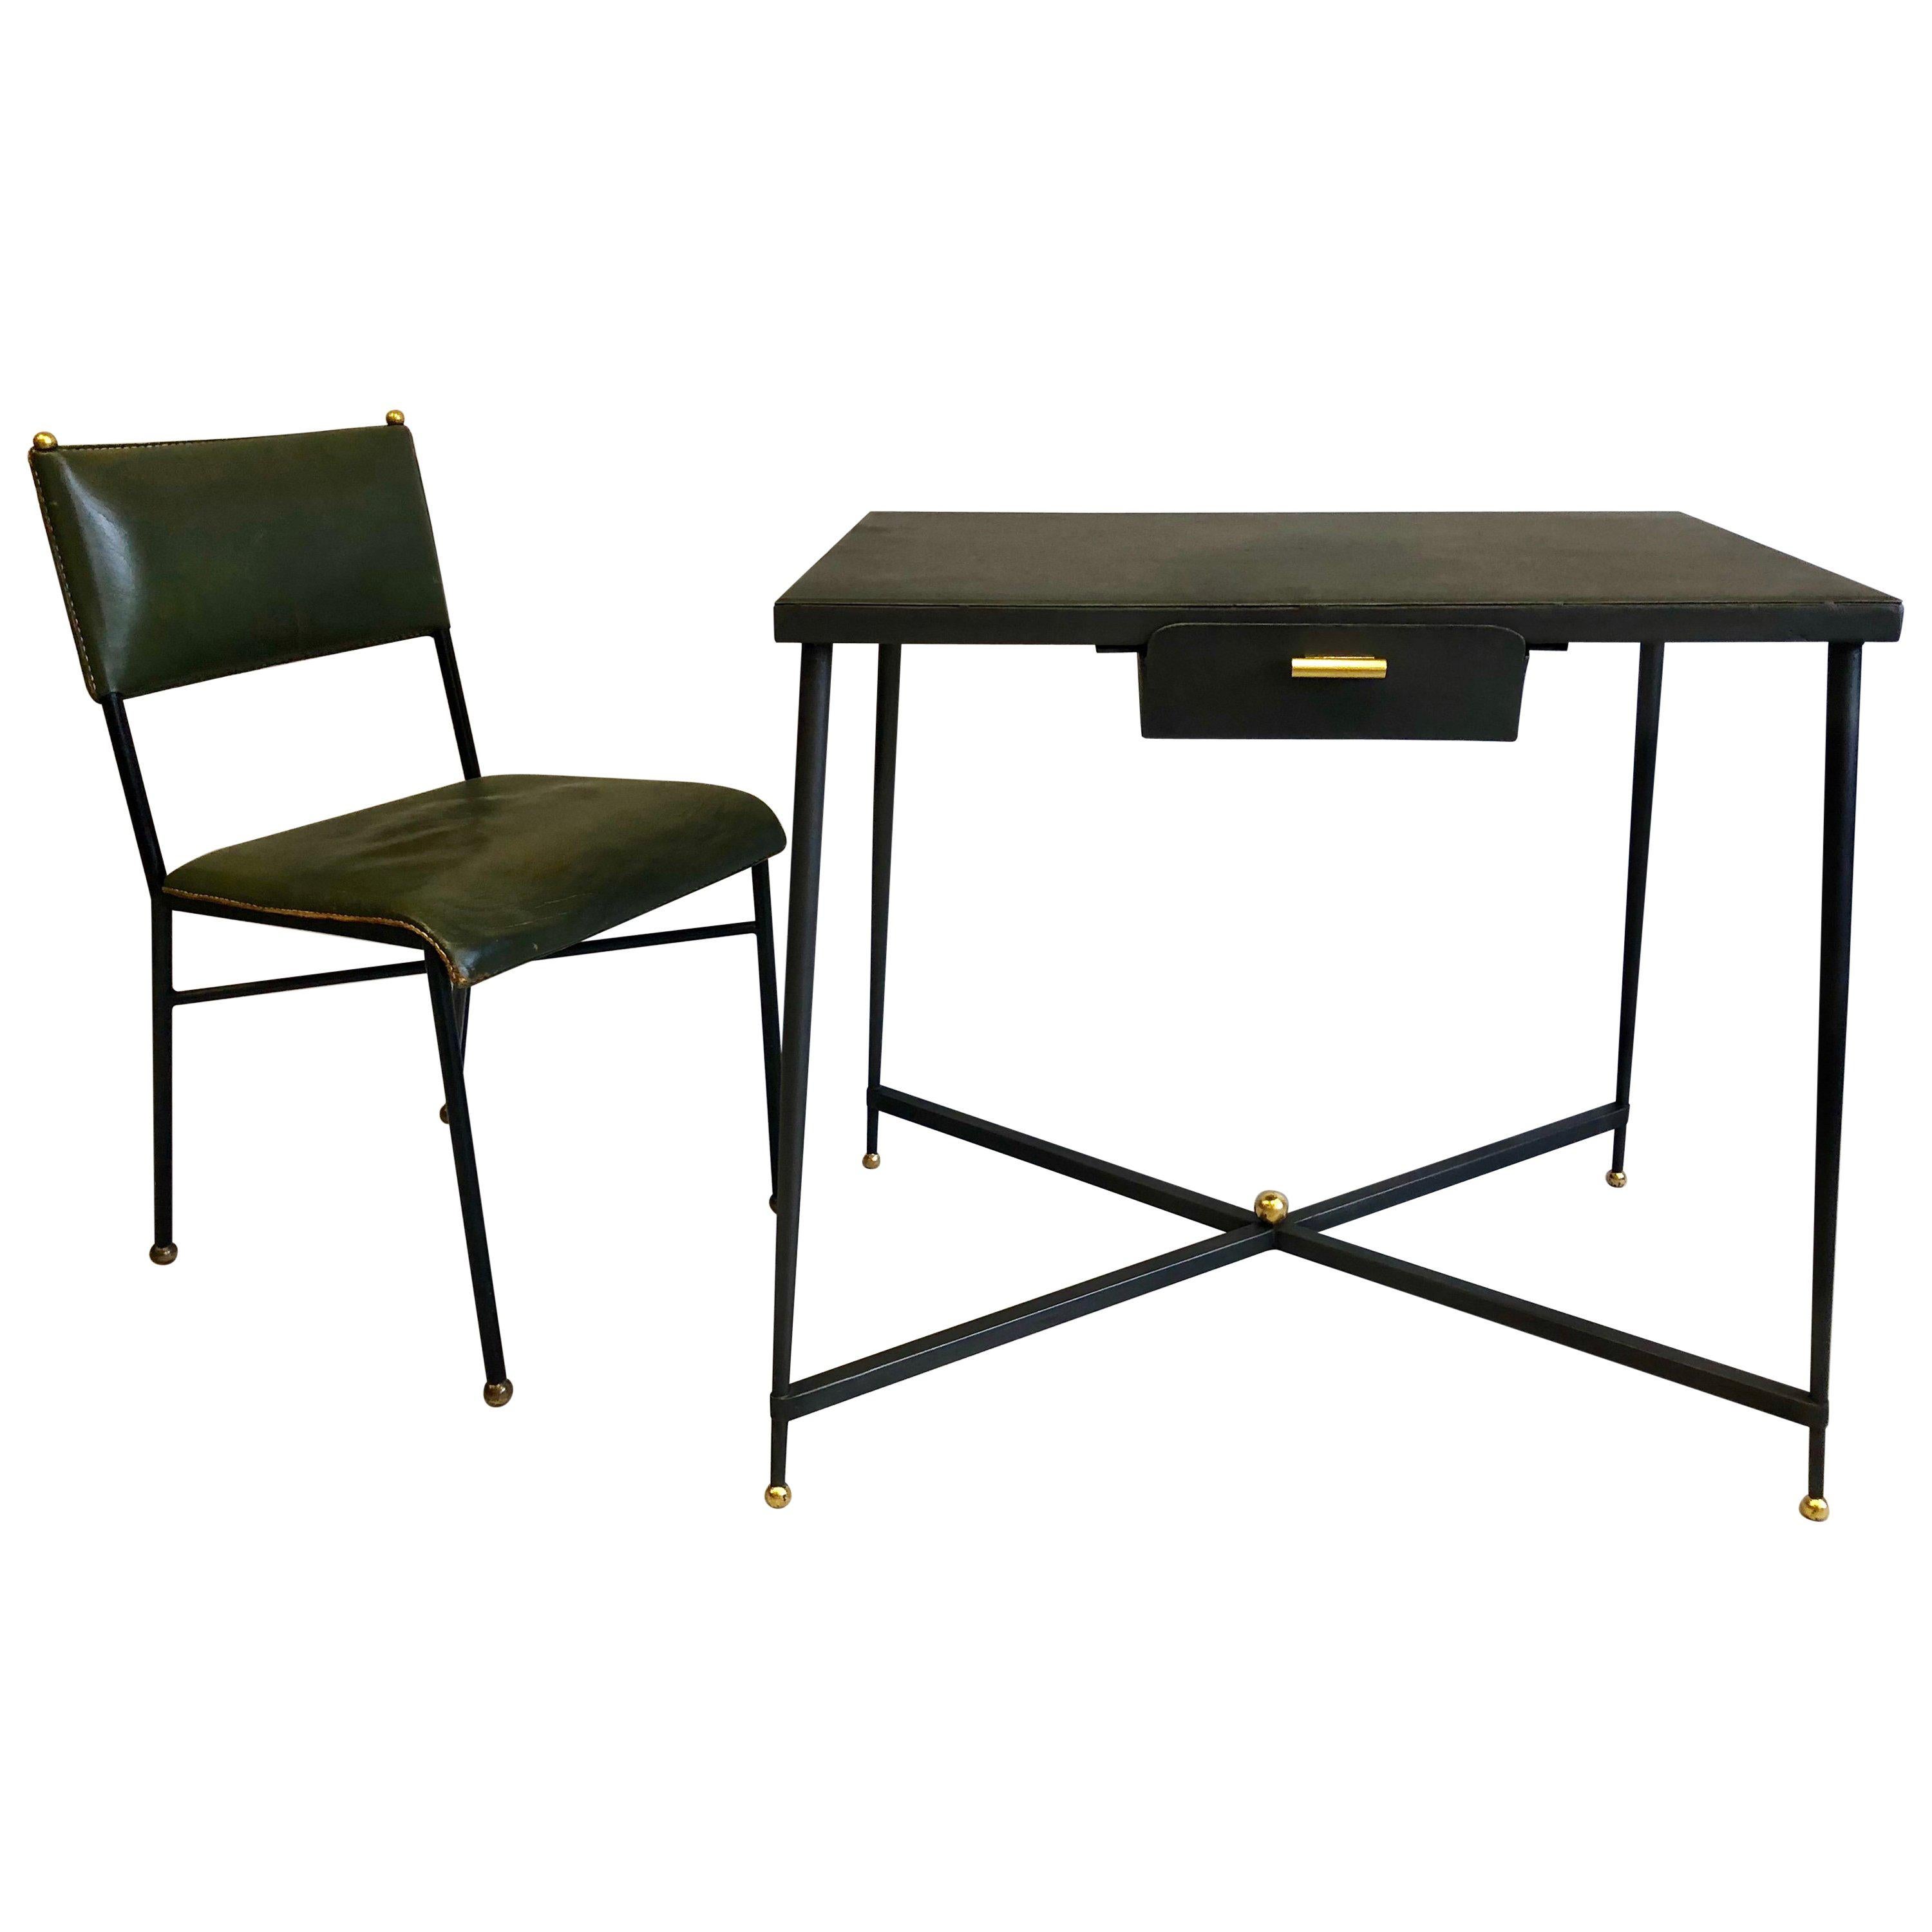 French Midcentury Steel and Brass Desk with Leather Desk Chair by Jacques Adnet